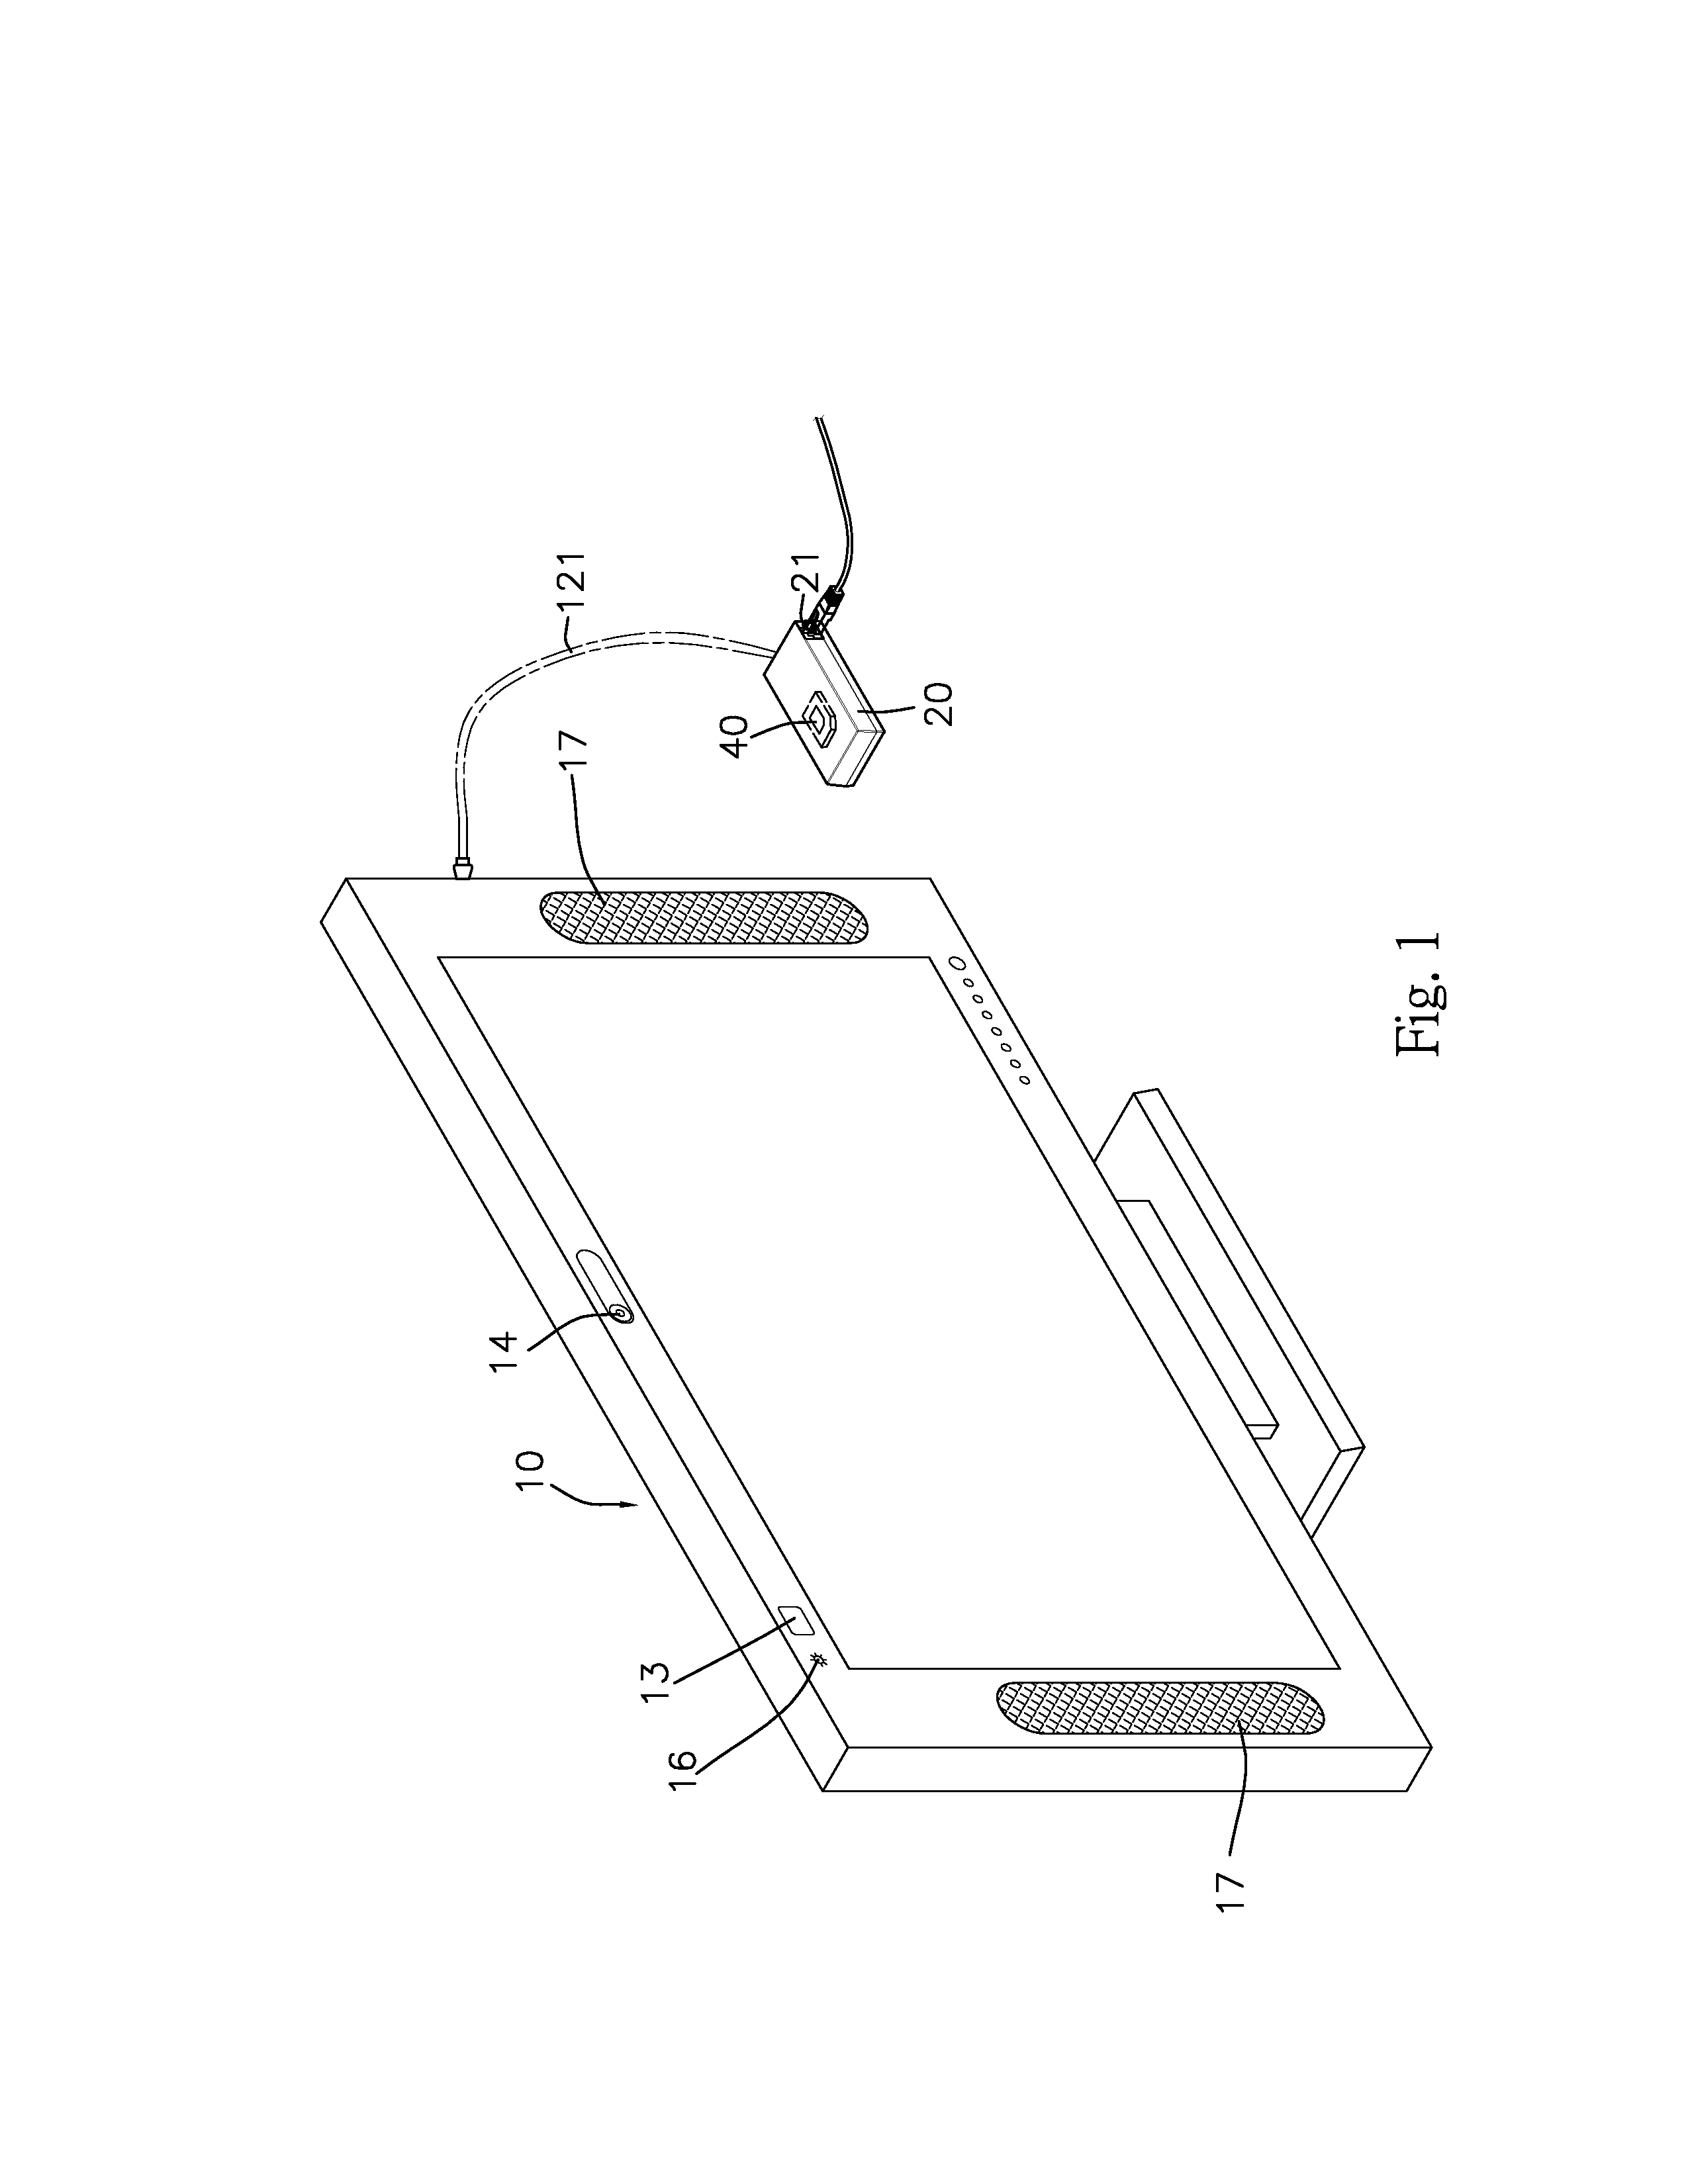 Display device with externally-connected mobile communication